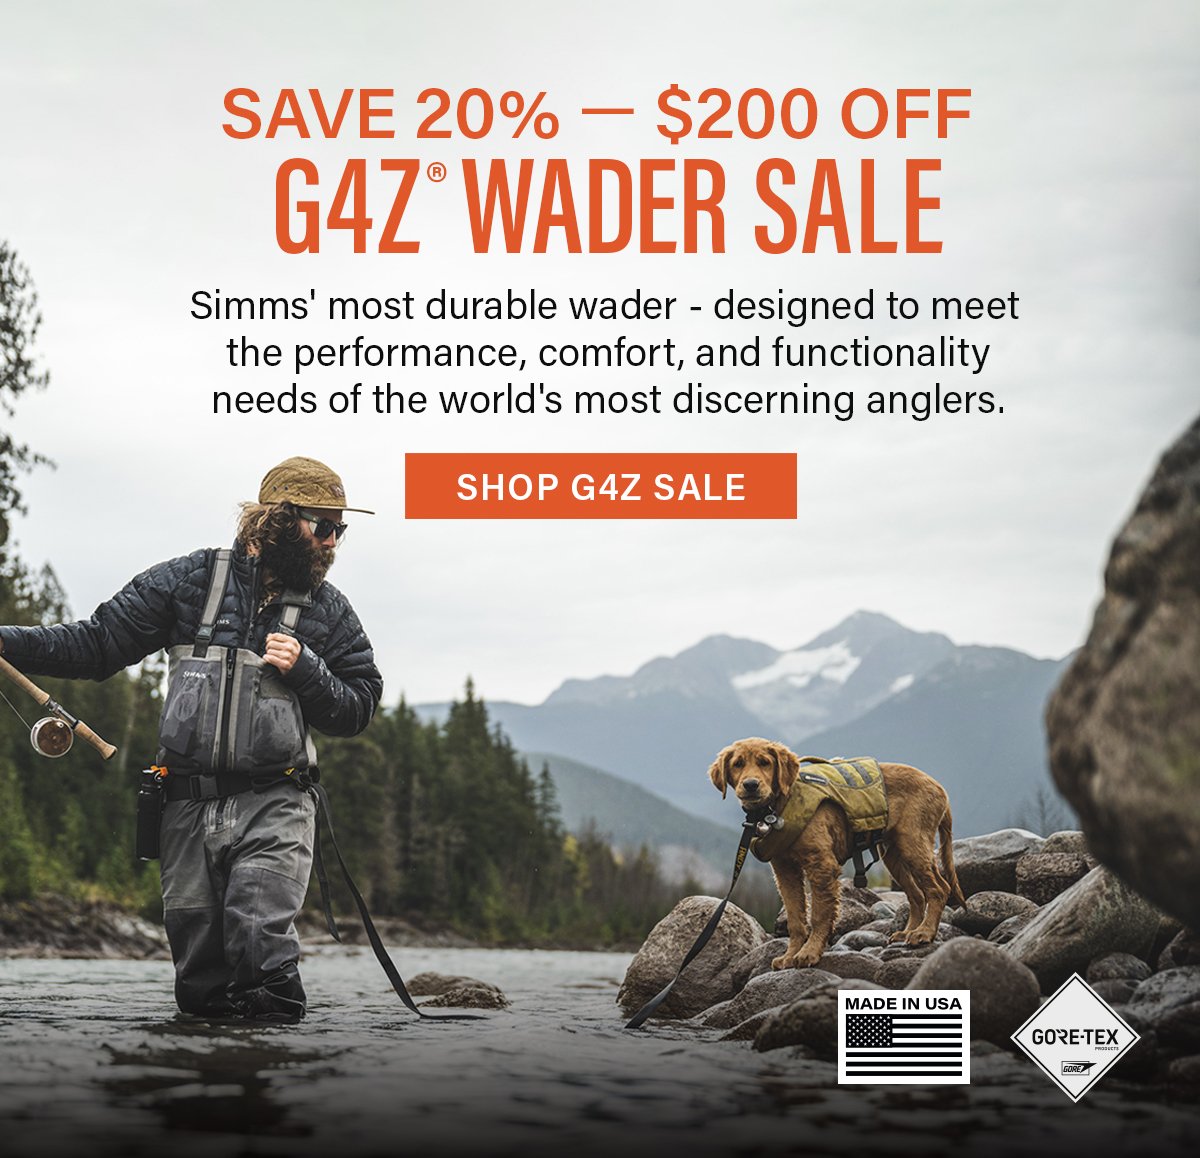 Simms Fishing Products: G4Z Waders Sale - 20% OFF